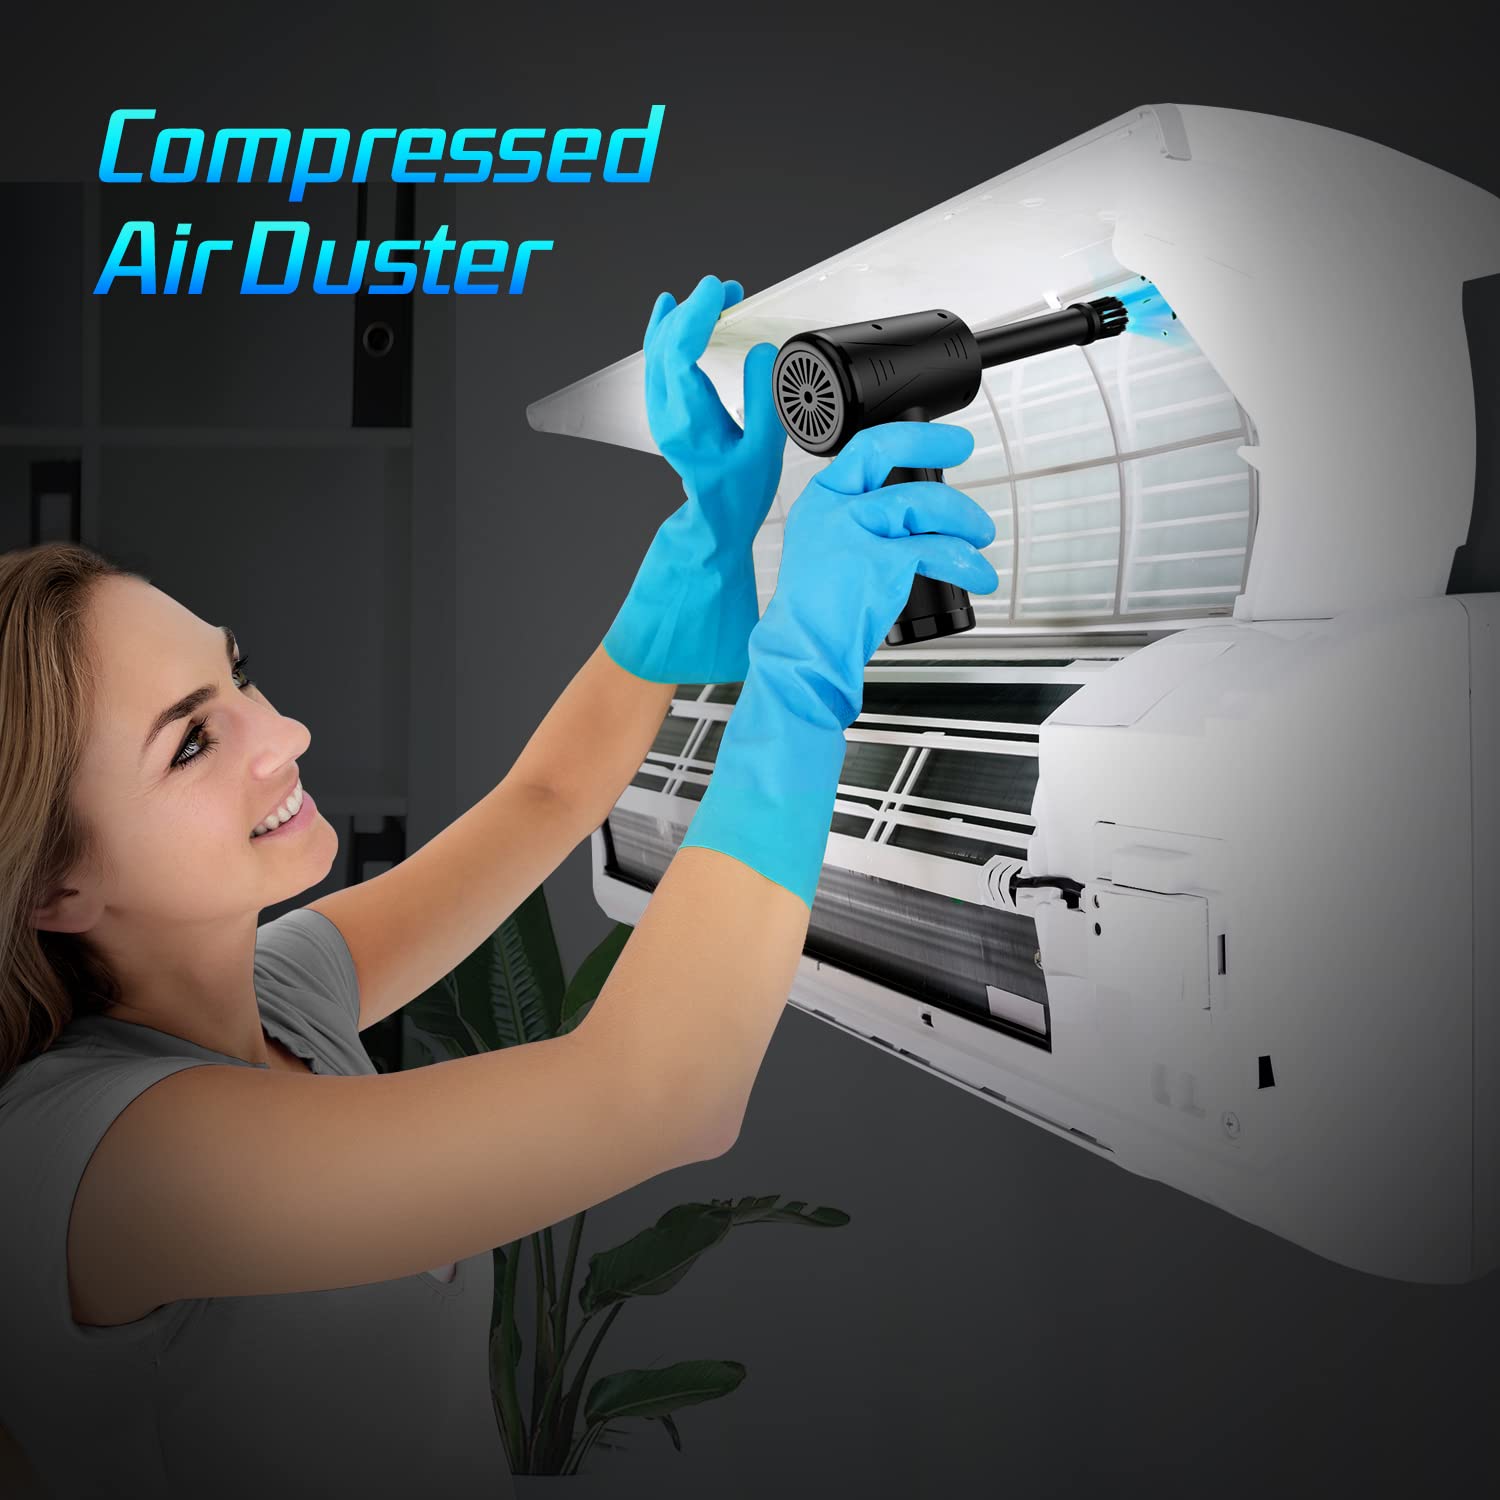 Compressed-air-dusters-electric-duster-100000RPM- air Blower for Computer - No Compressed air can - Replace Canned air dusters -Keyboard Cleaner - pc air dusters - Compressed air Electric 7600mAh